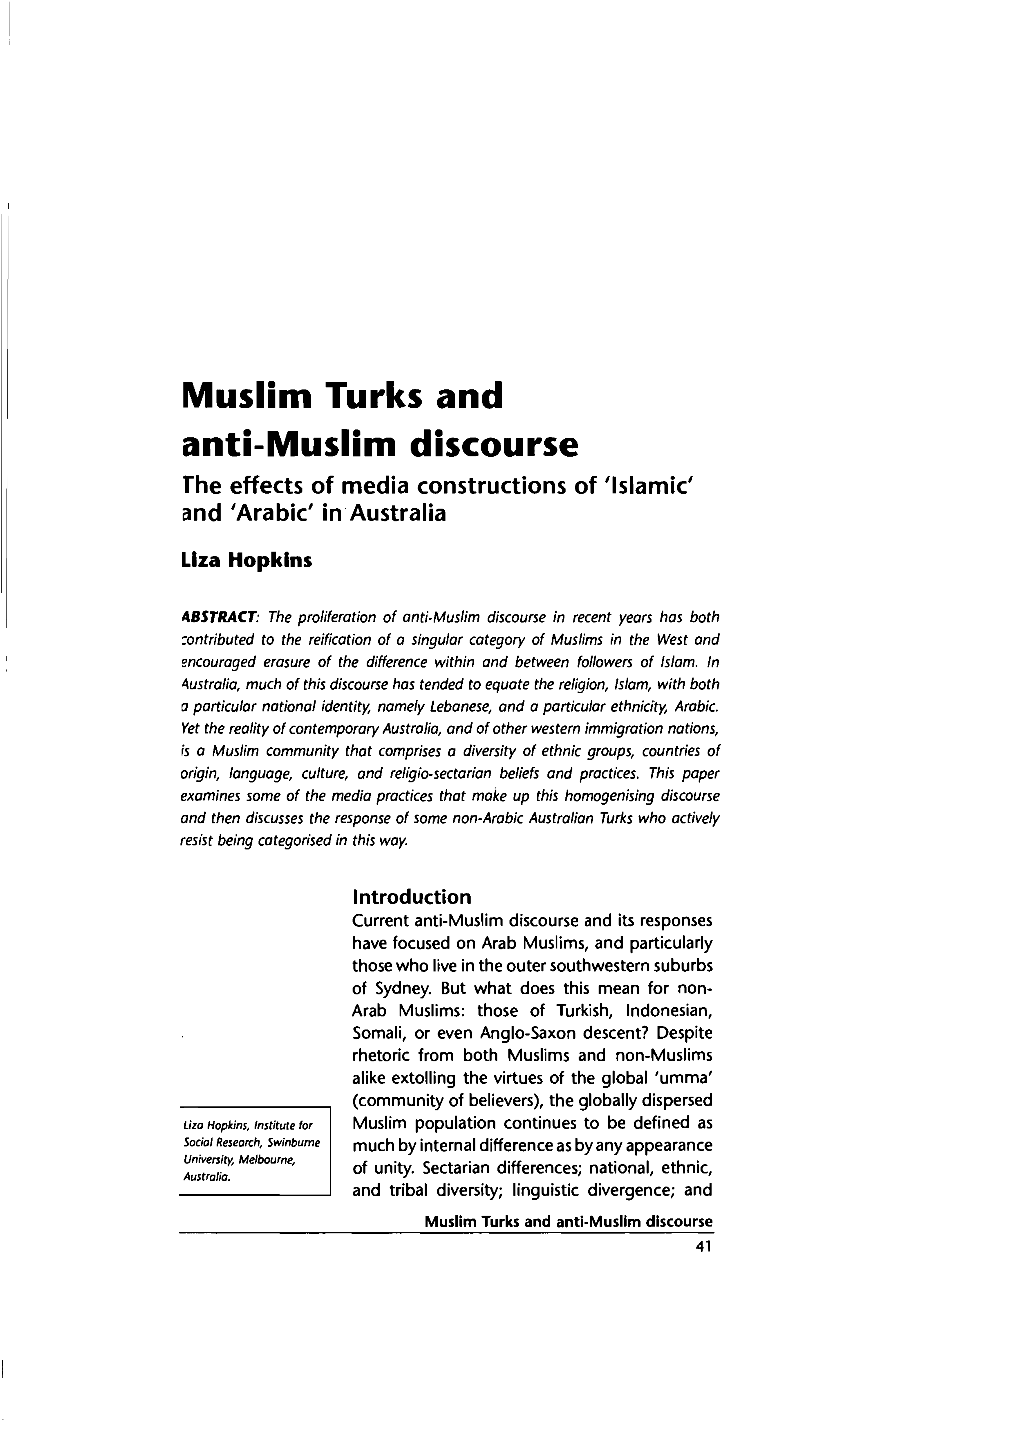 Muslim Turks and Anti-Muslim Discourse the Effects of Media Constructions of 'Islamic' and 'Arabic' In' Australia